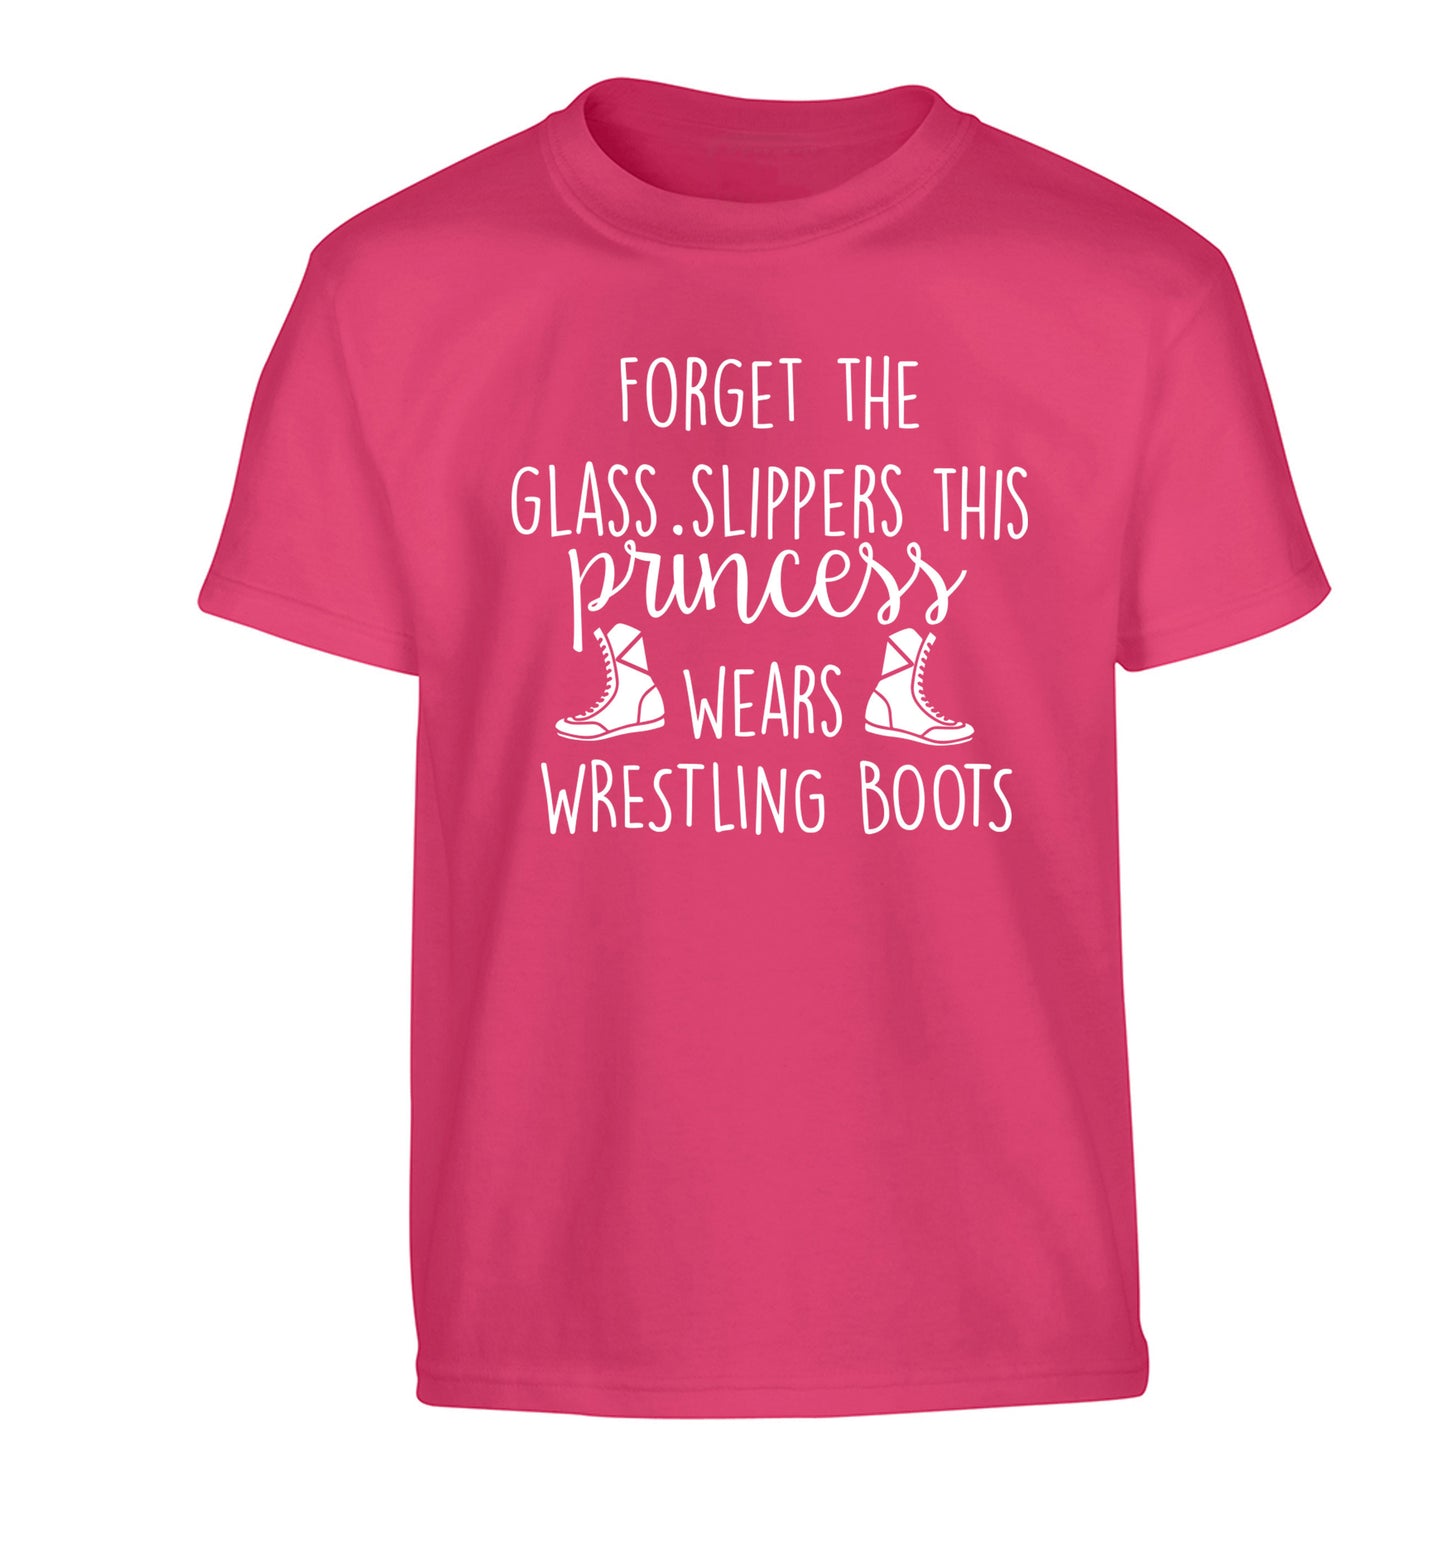 Forget the glass slippers this princess wears wrestling boots Children's pink Tshirt 12-14 Years